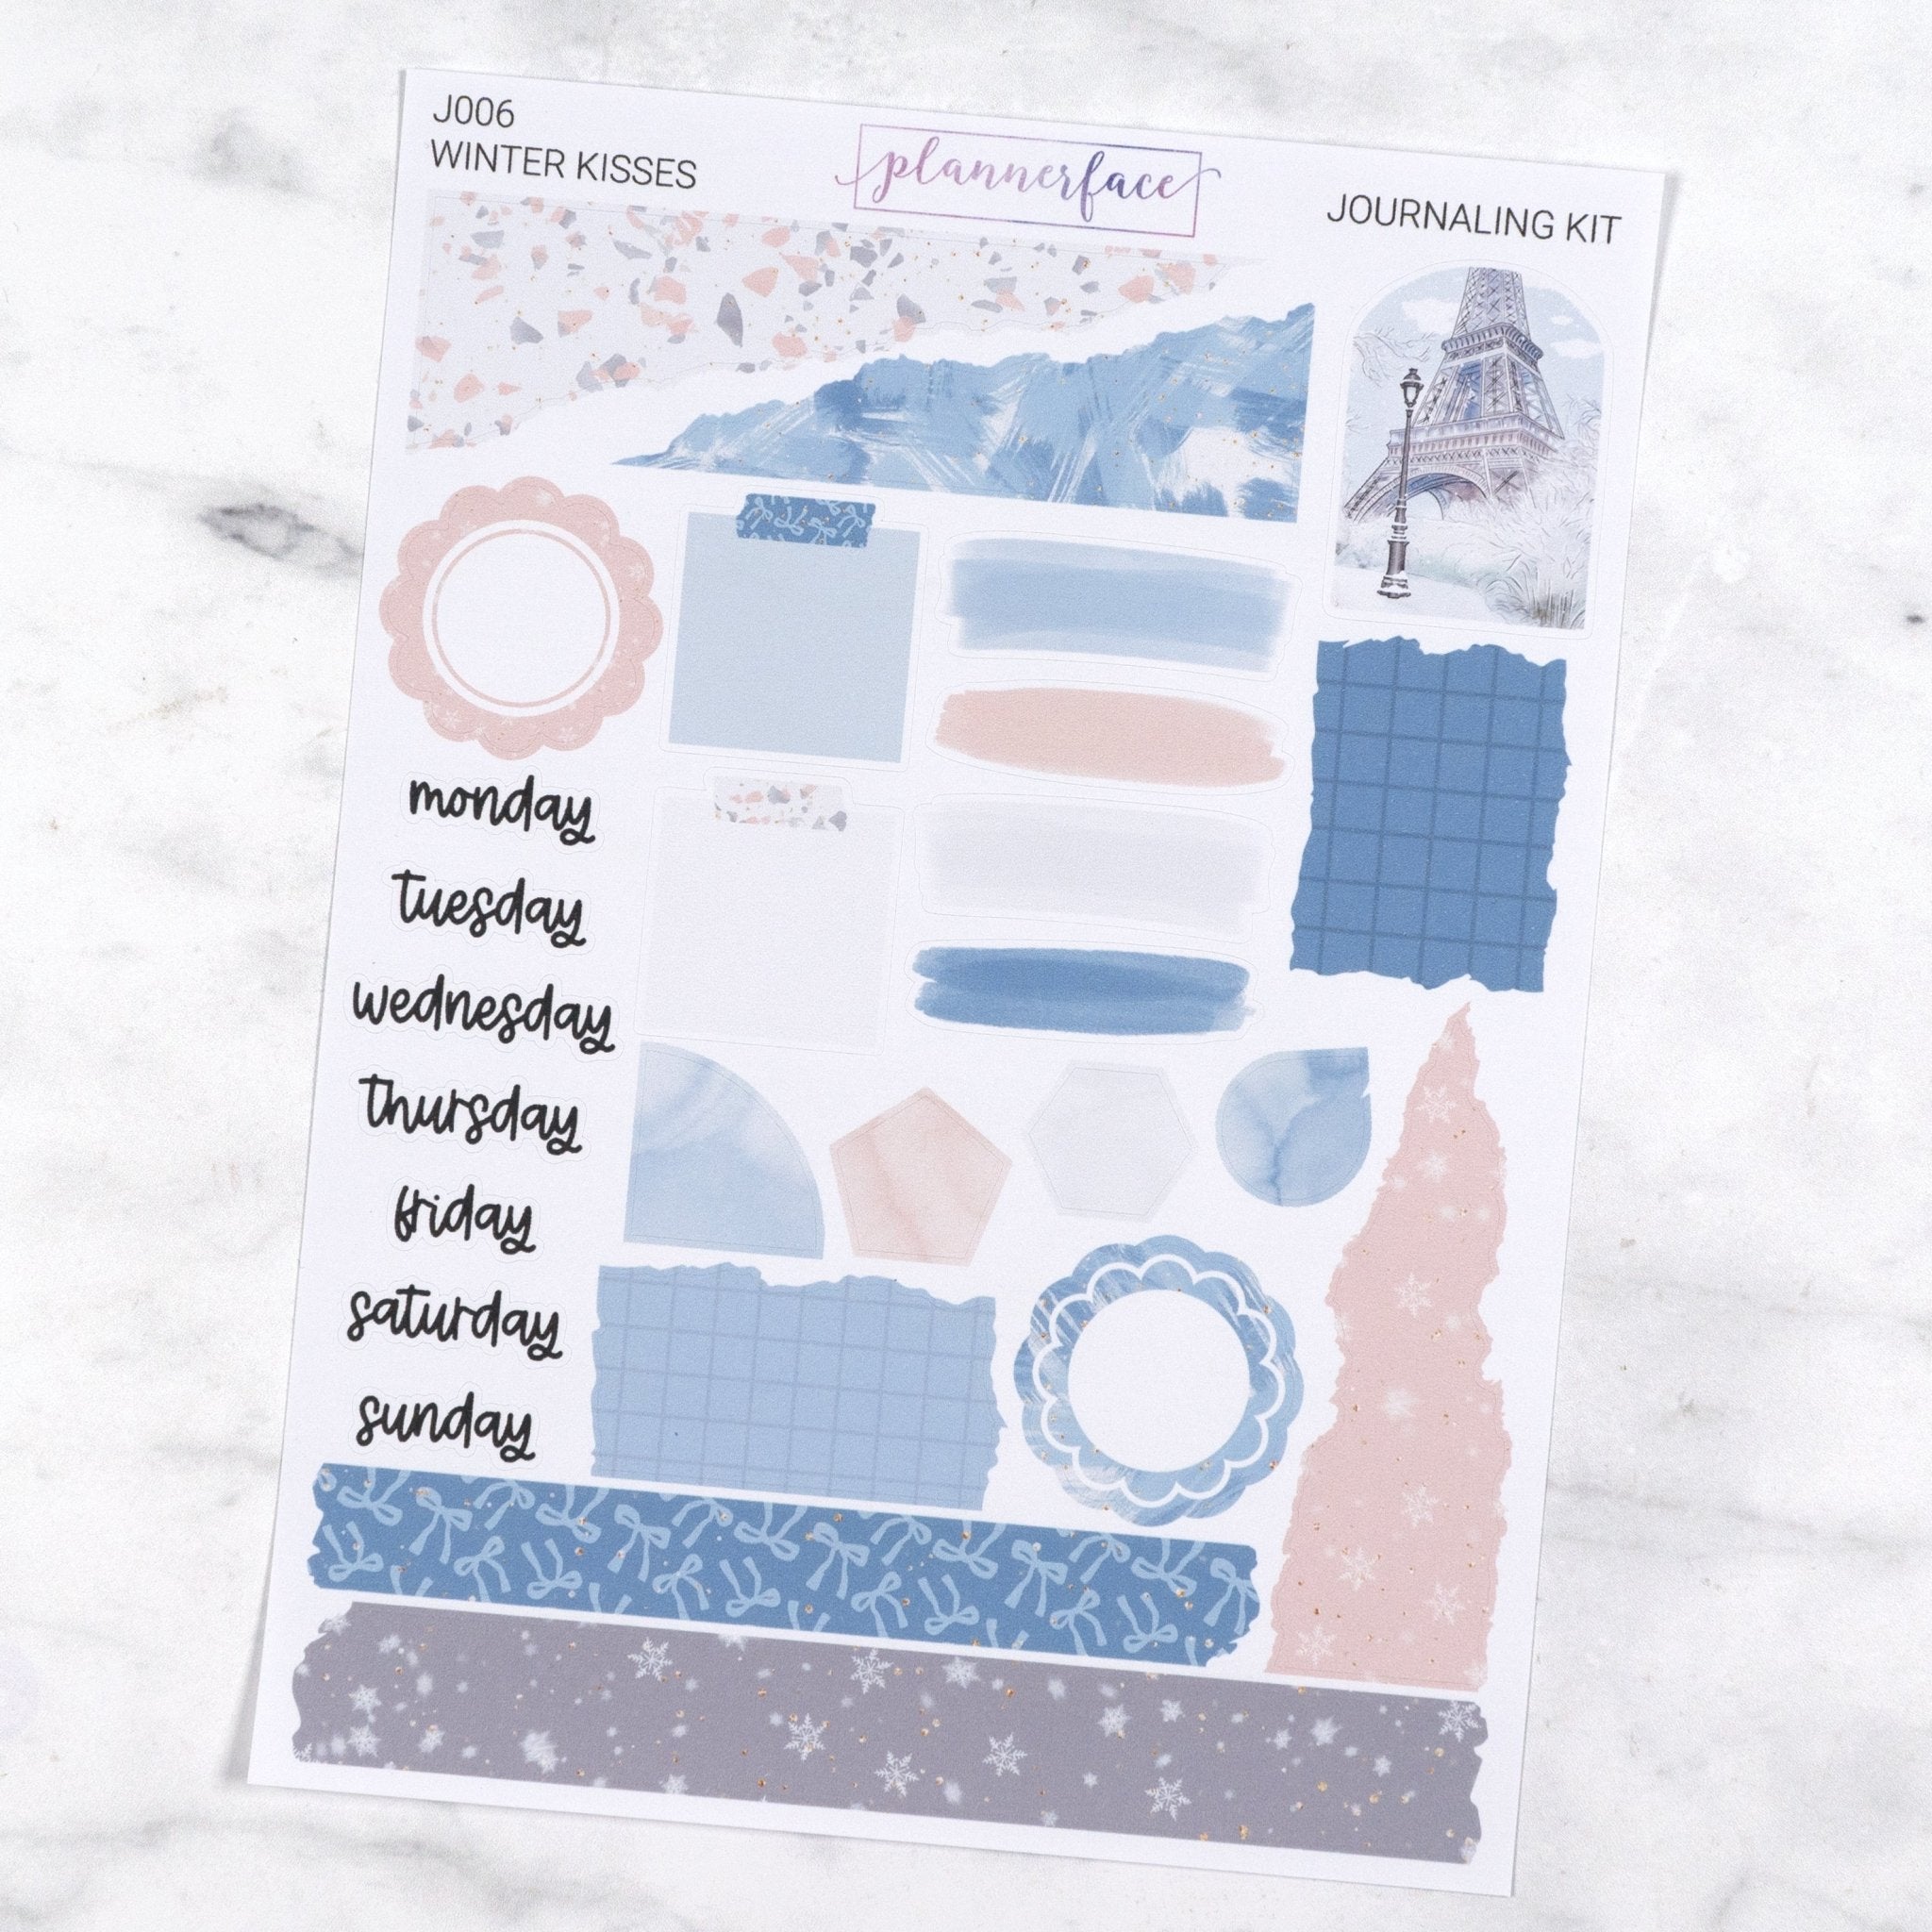 Winter Kisses | Journaling Kit by Plannerface